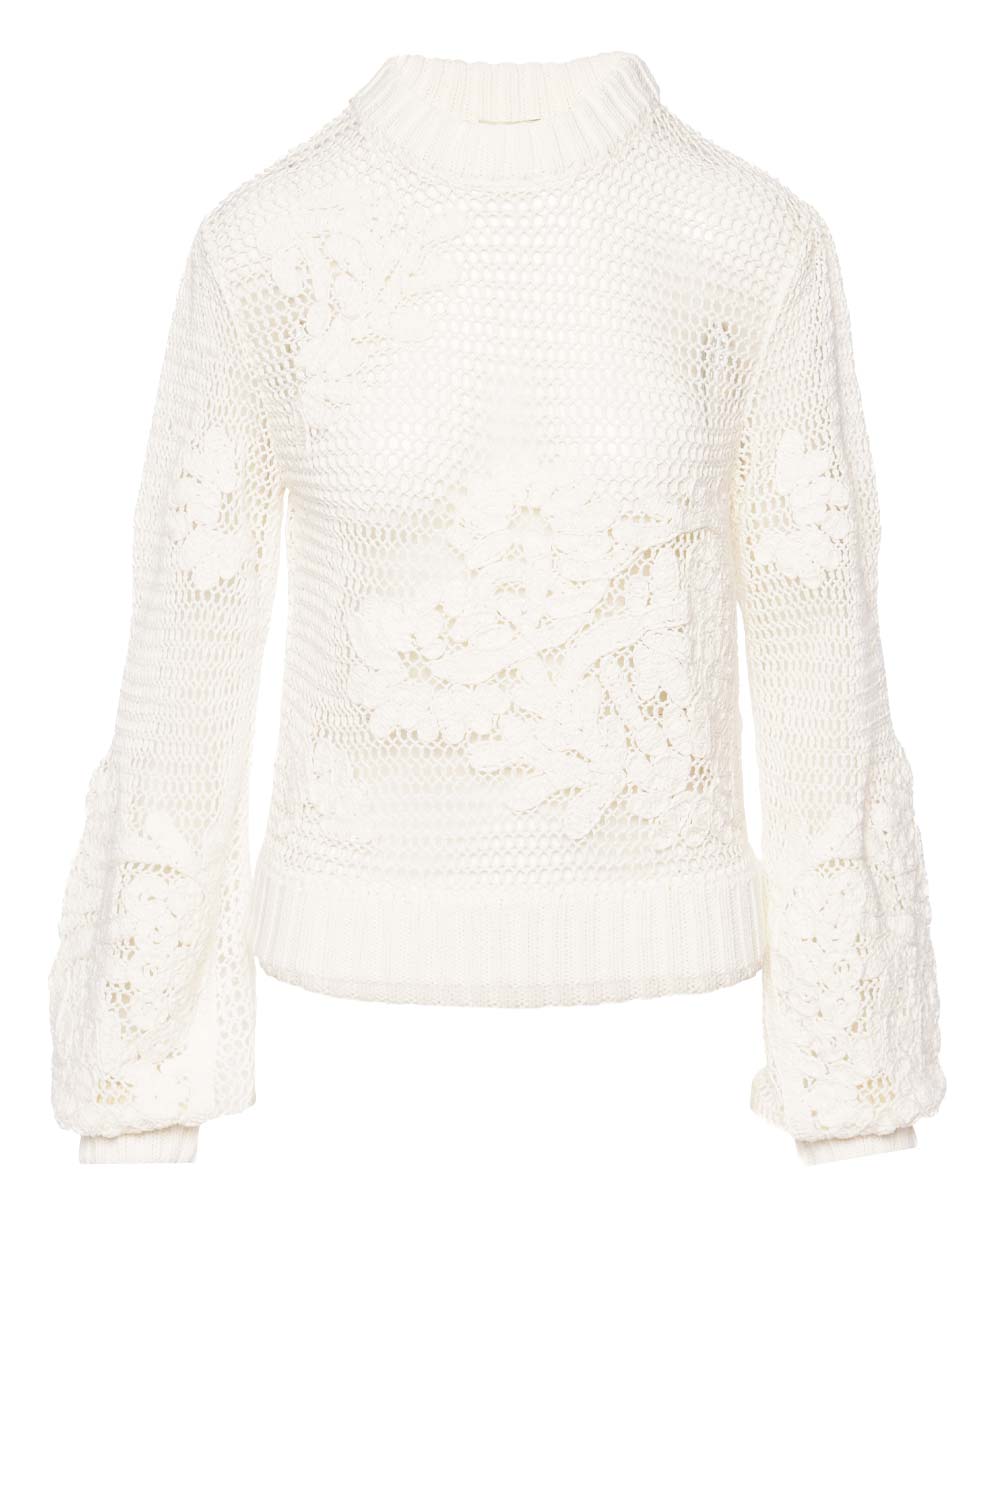 FARM Rio White Floral Embroidered Knit Sweater